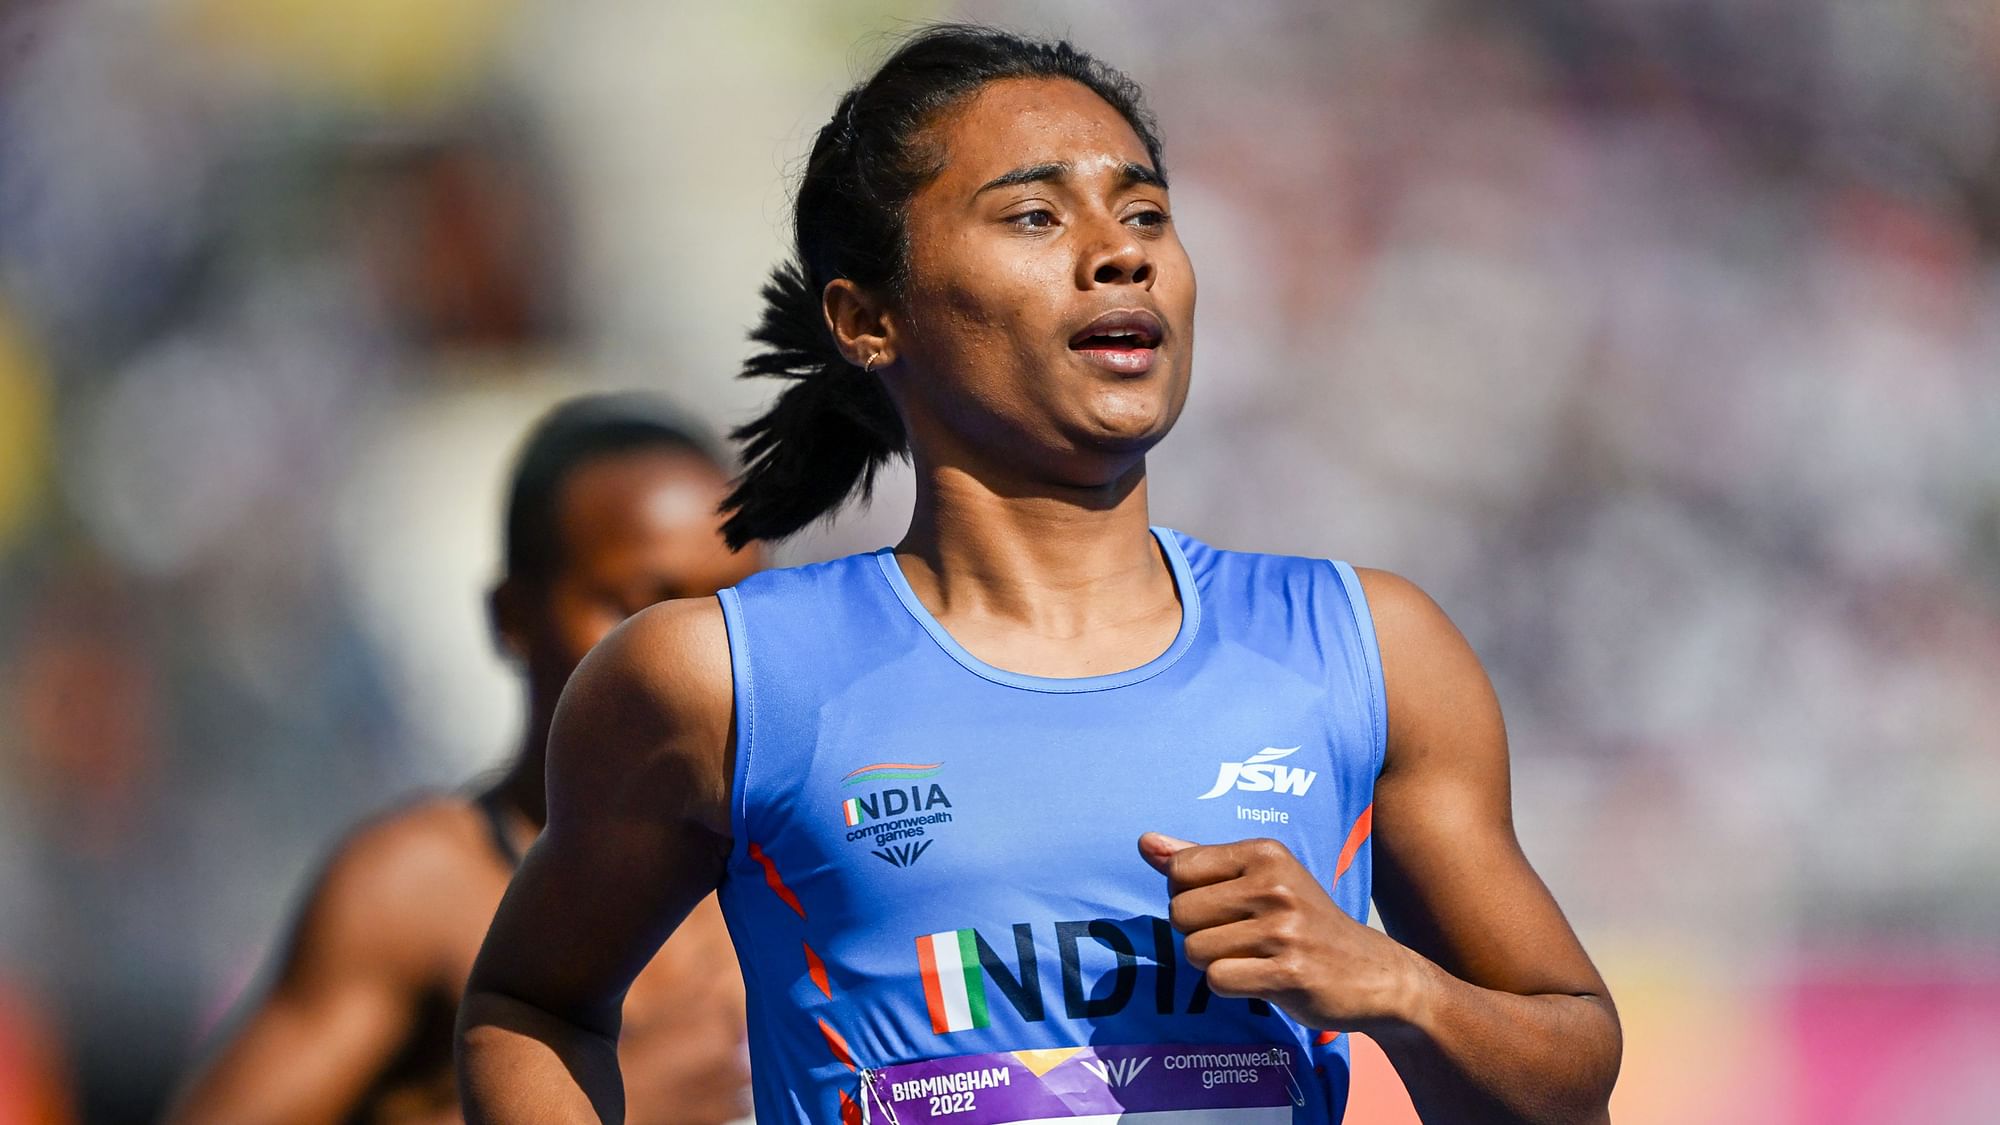 <div class="paragraphs"><p>CWG 2022: Indian sprinter Hima Das in action at 200m quarter-finals at Commonwealth Games 2022</p></div>